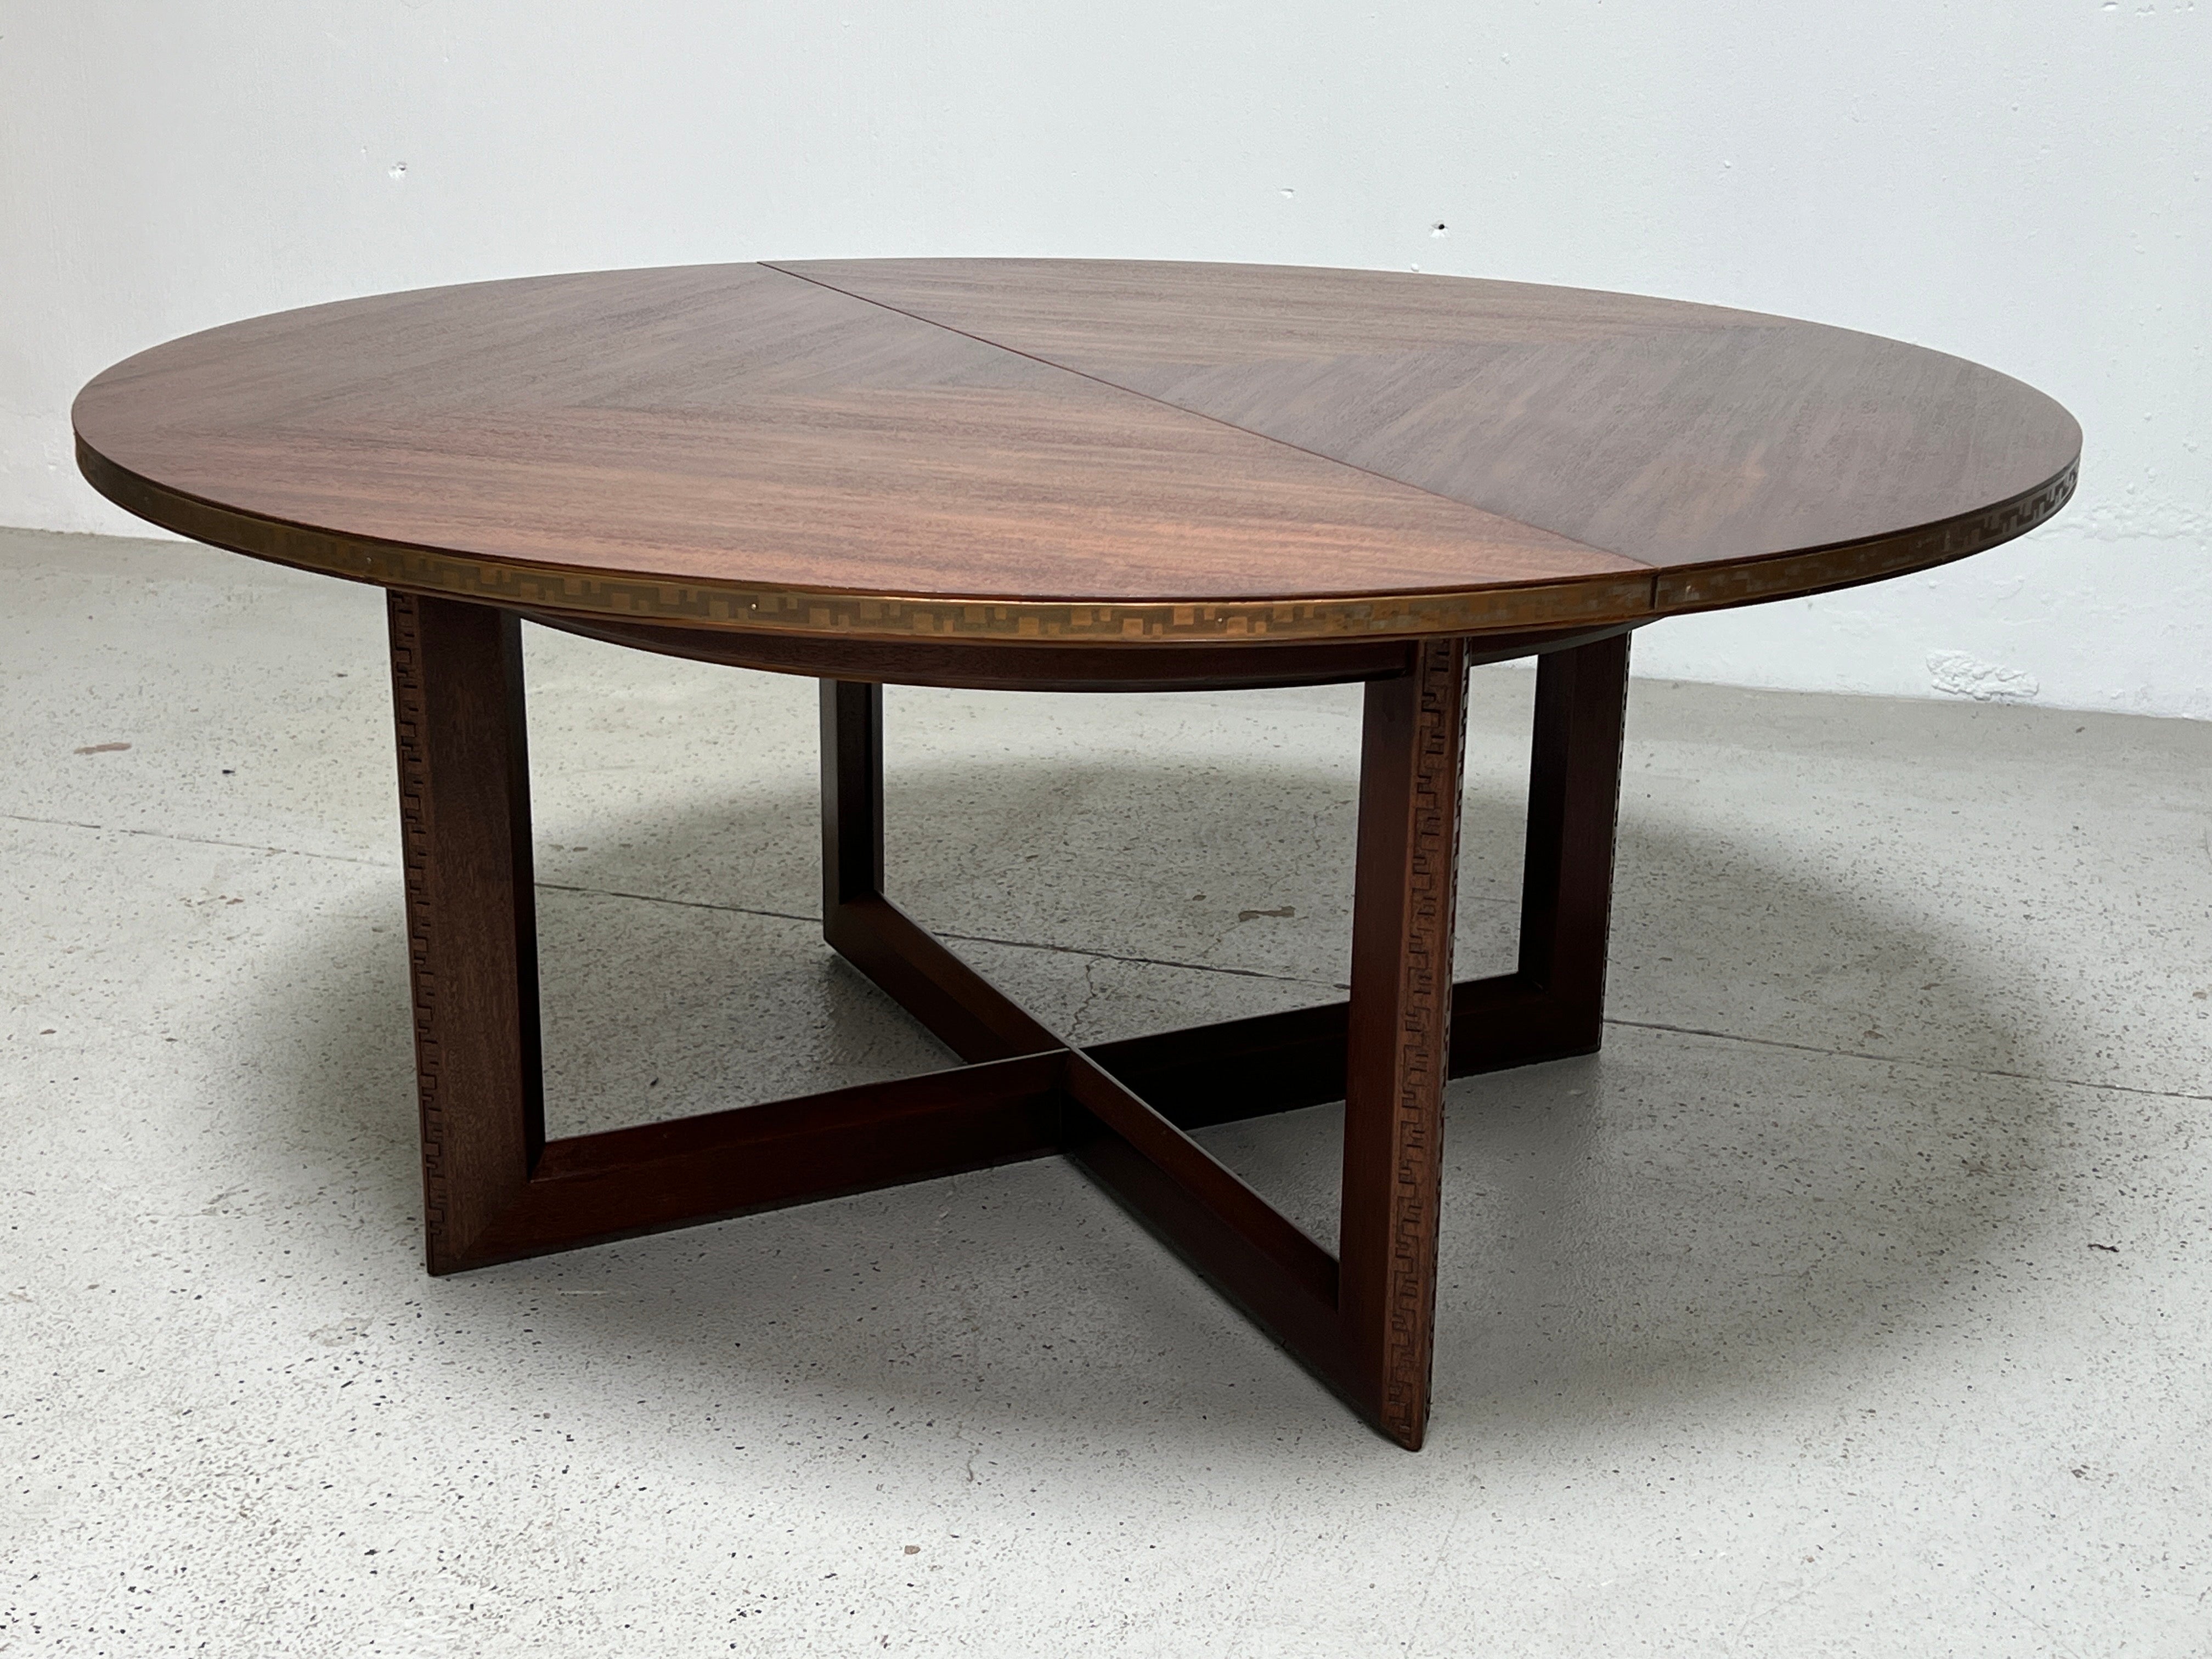 Frank Lloyd Wright for Heritage Henredon. Taliesin dining or game table. Mahogany table, concentric square pattern bookmatched with embossed copper 